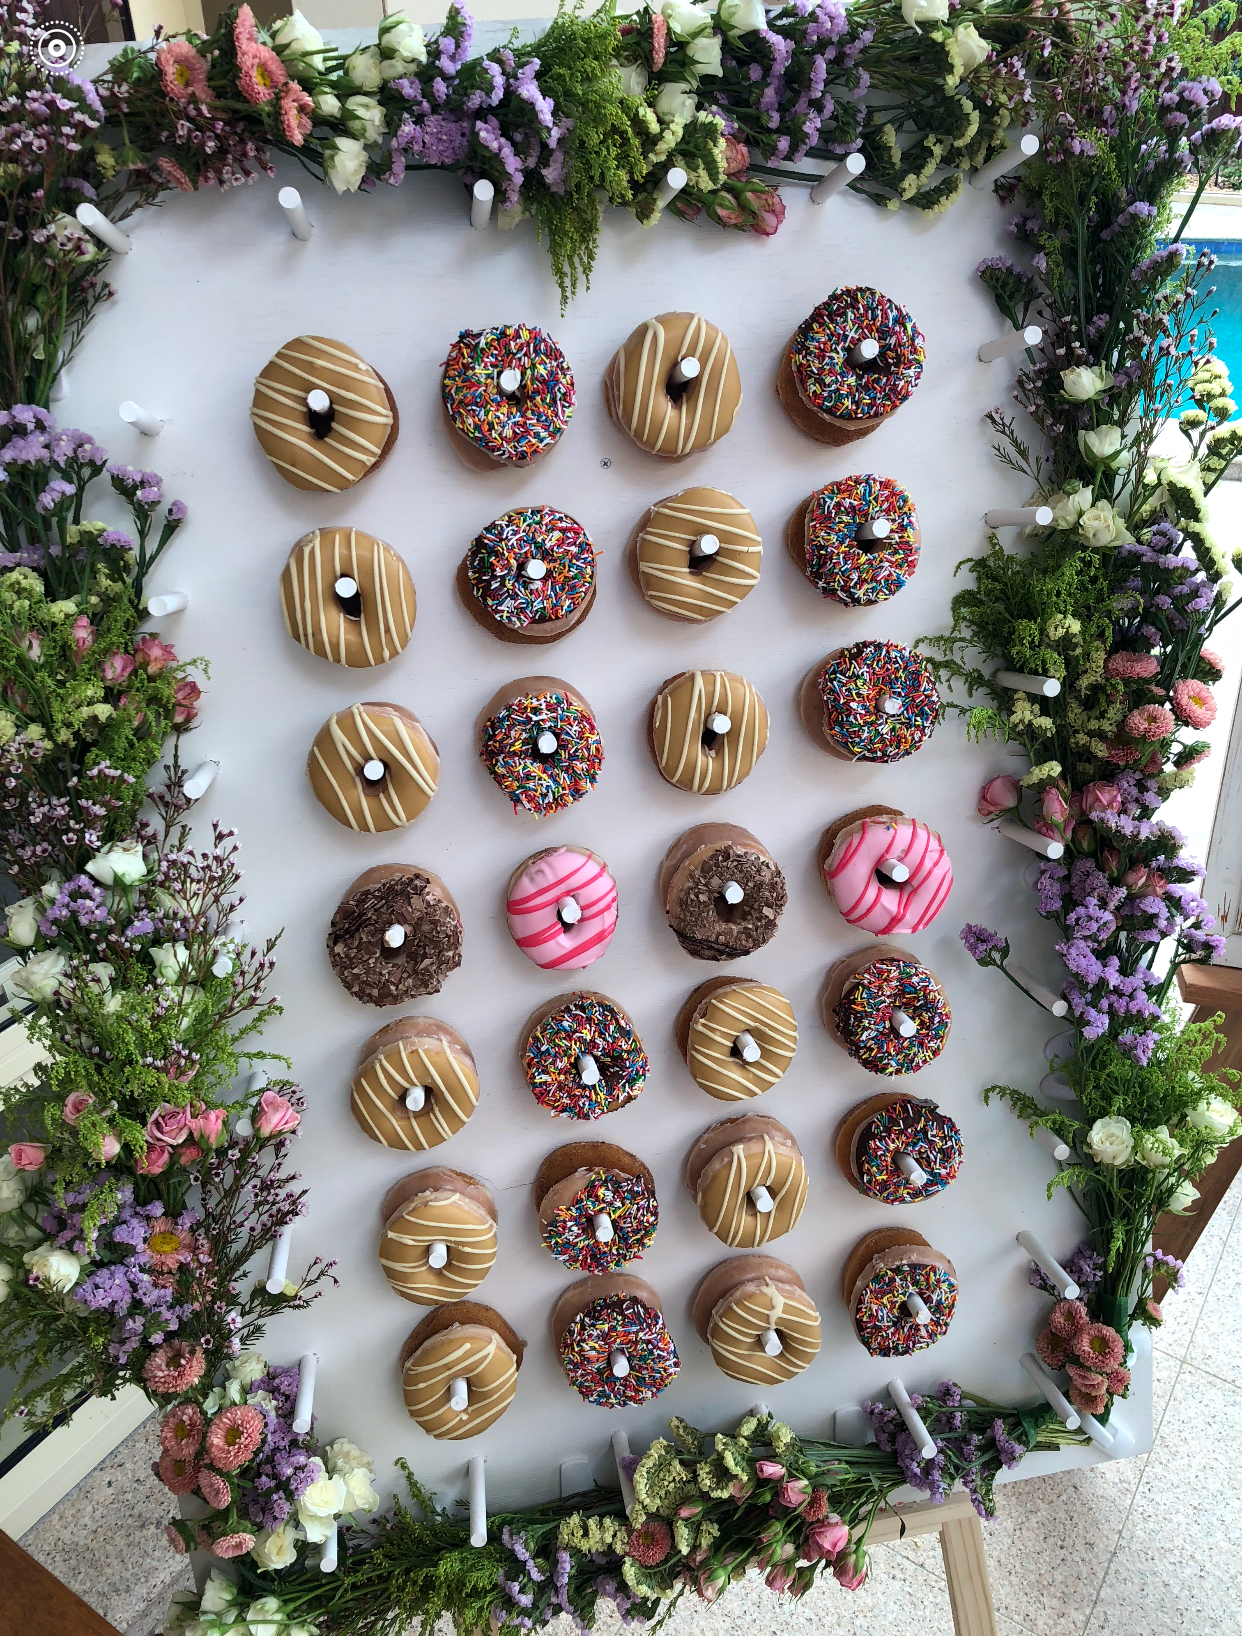 Donut wall with flowers